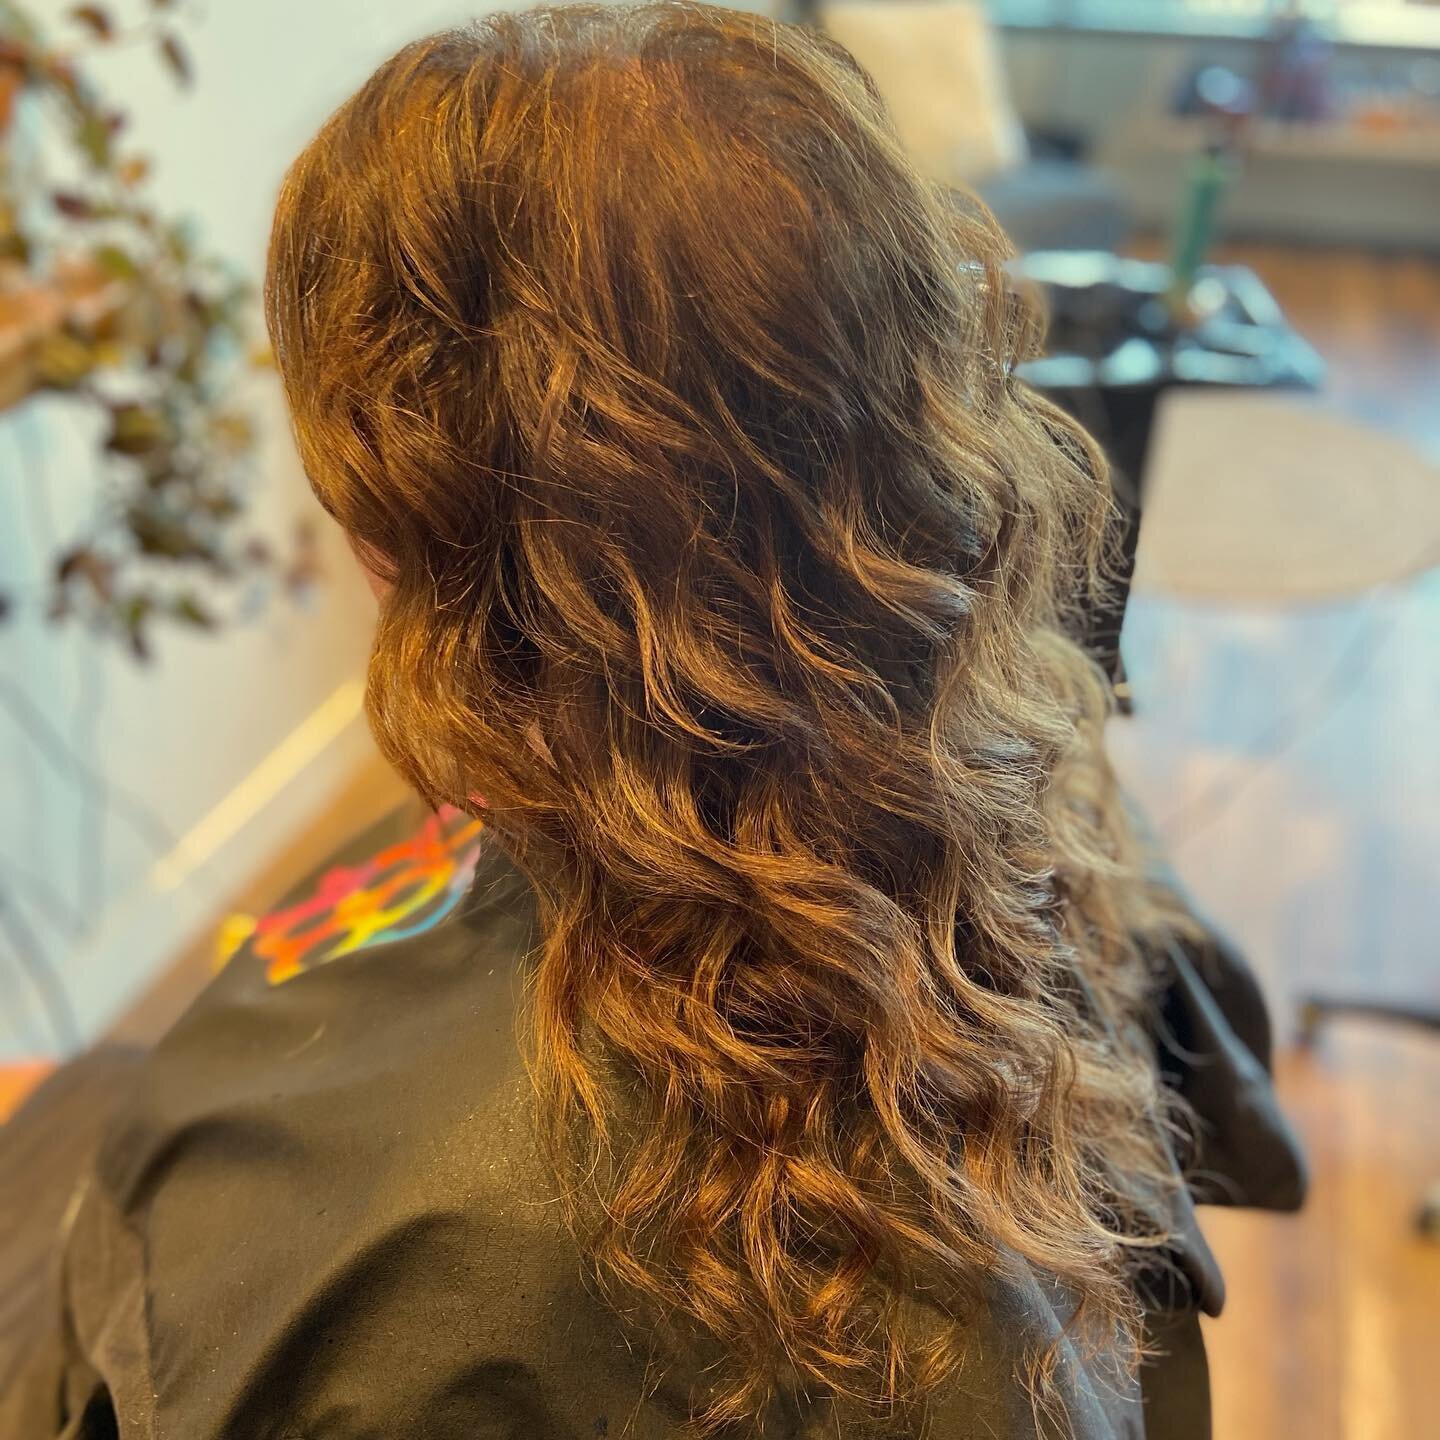 Colour not only adds depth shine and dimension. It creates texture and moisture and confidence 🤍
&bull;
&bull;
&bull;
&bull;
&bull;
#colour #confidence #depth #curlyhair #styles #clients #products #hydration #health #haircuts #warmtones #shadeseq  #